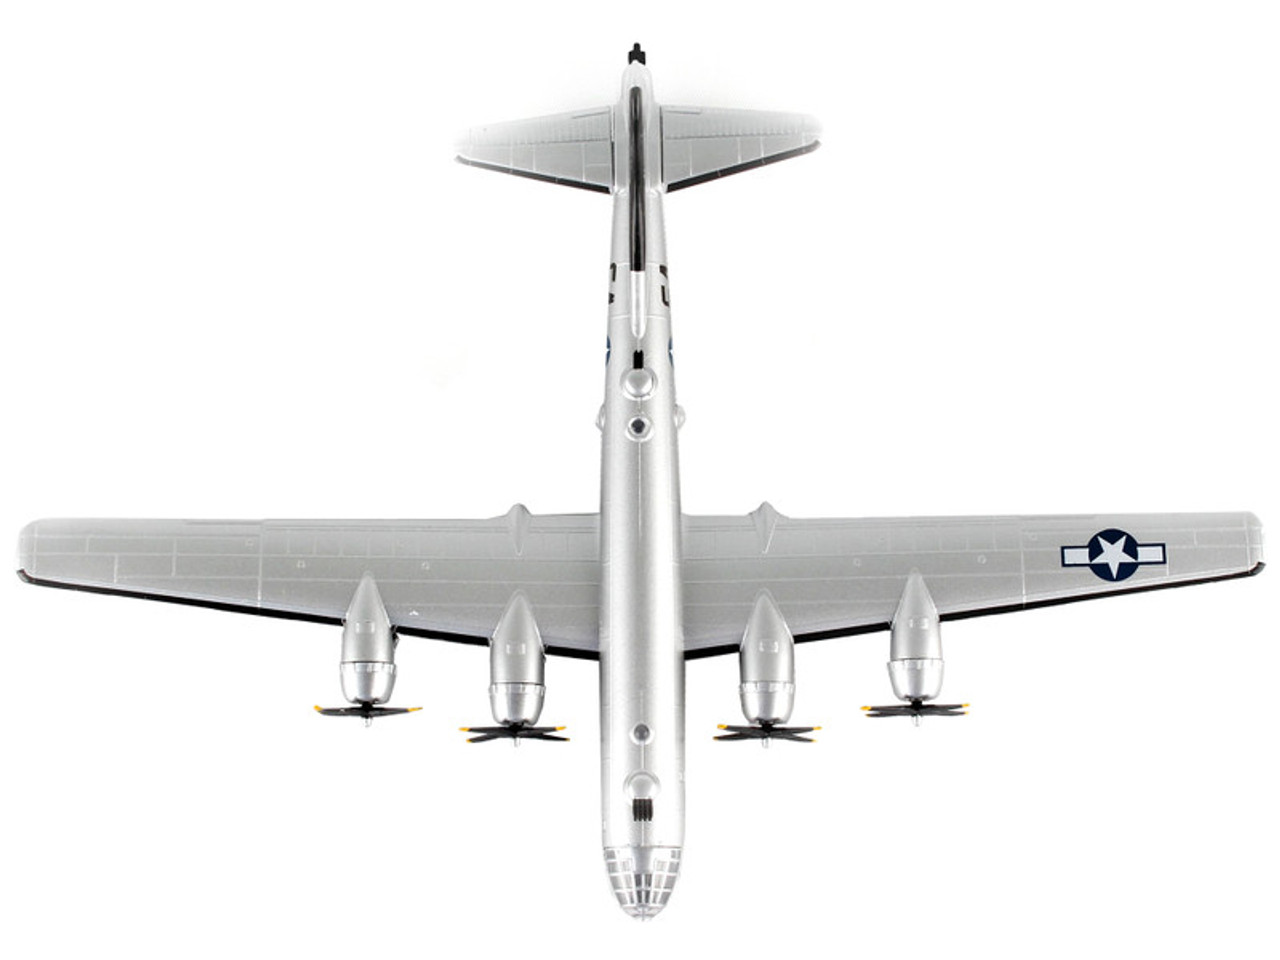 Boeing B-29 Superfortress Aircraft "T Square 59 - Seattle Museum of Flight" United States Army Air Force 1/200 Diecast Model Airplane by Postage Stamp